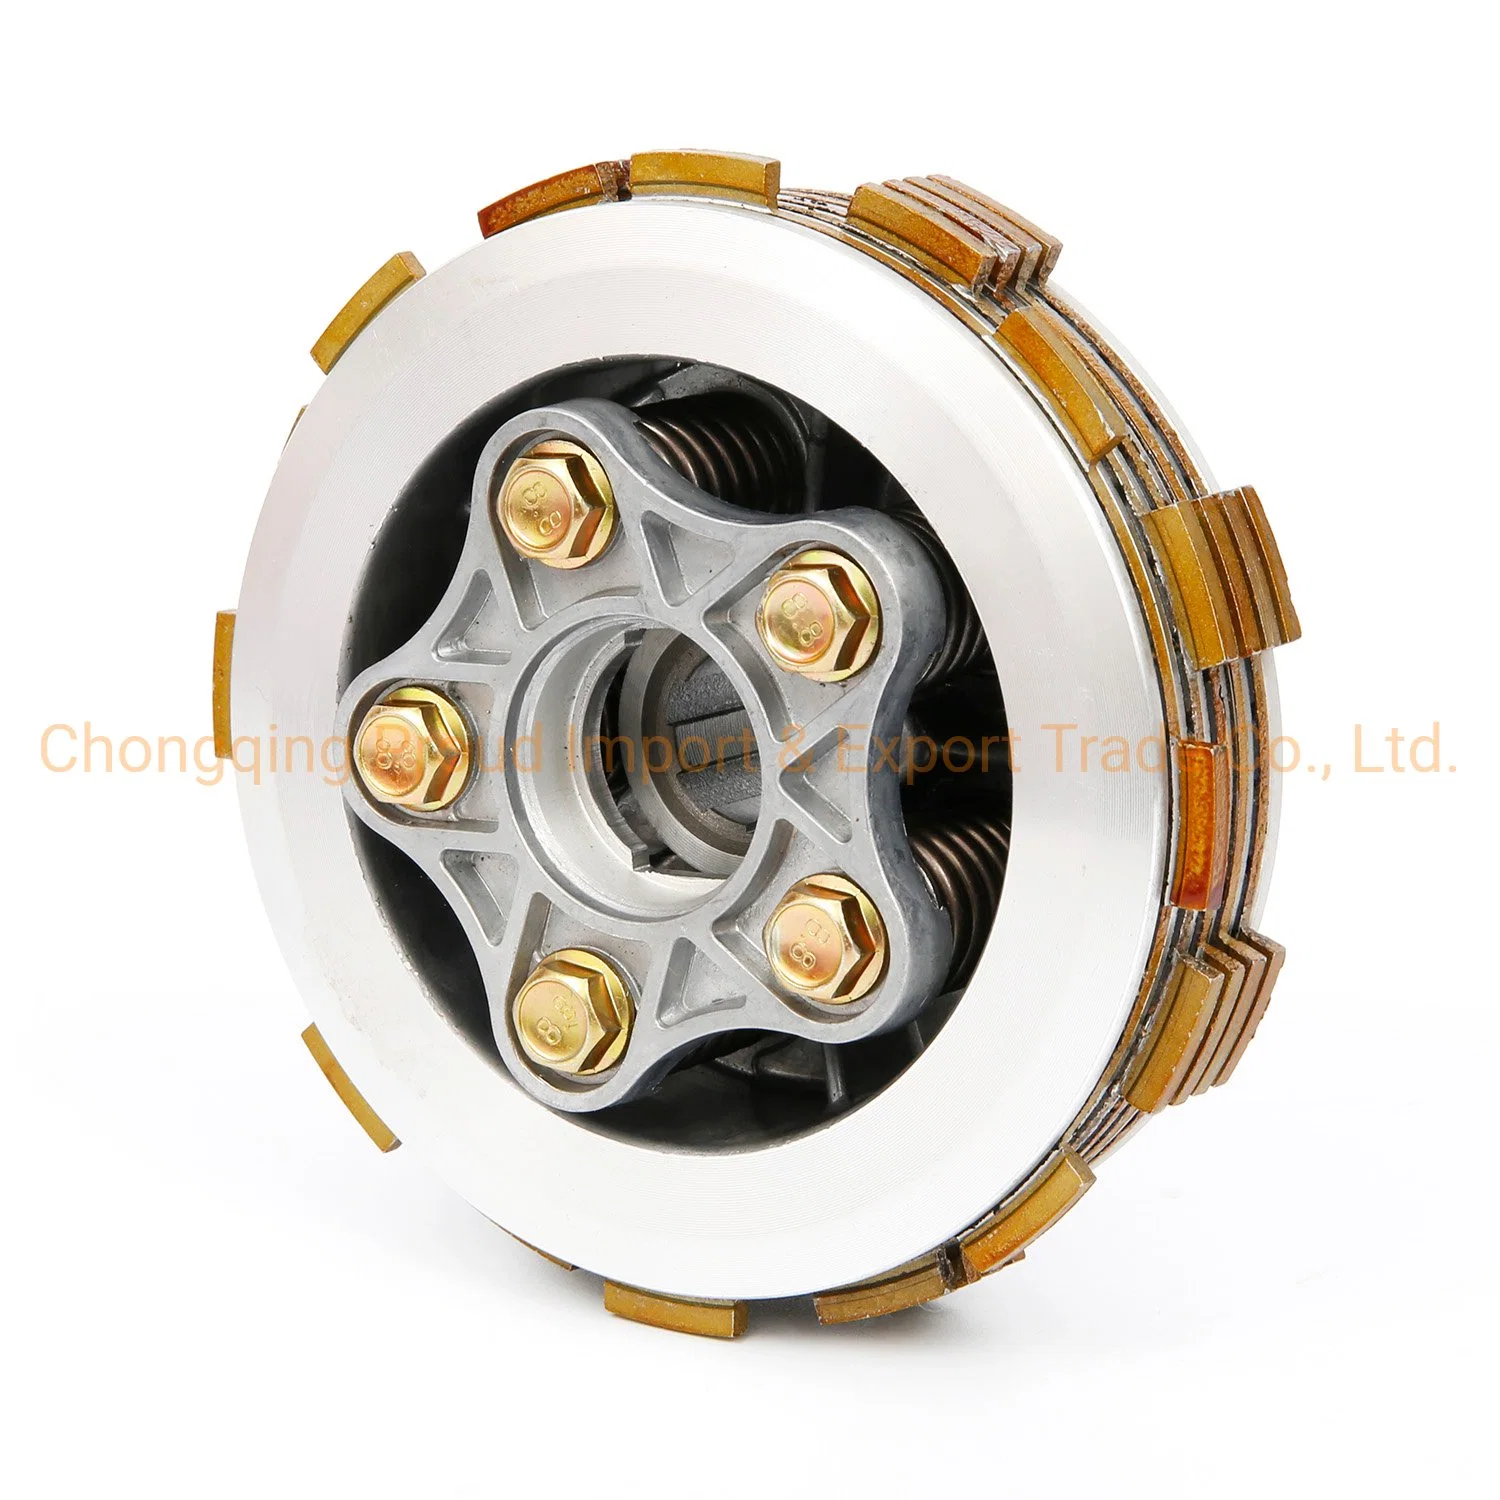 Motorcycle Spare Parts Cg150 Clutch Hub Assy OEM Quality Cg150 Motorcycle Parts